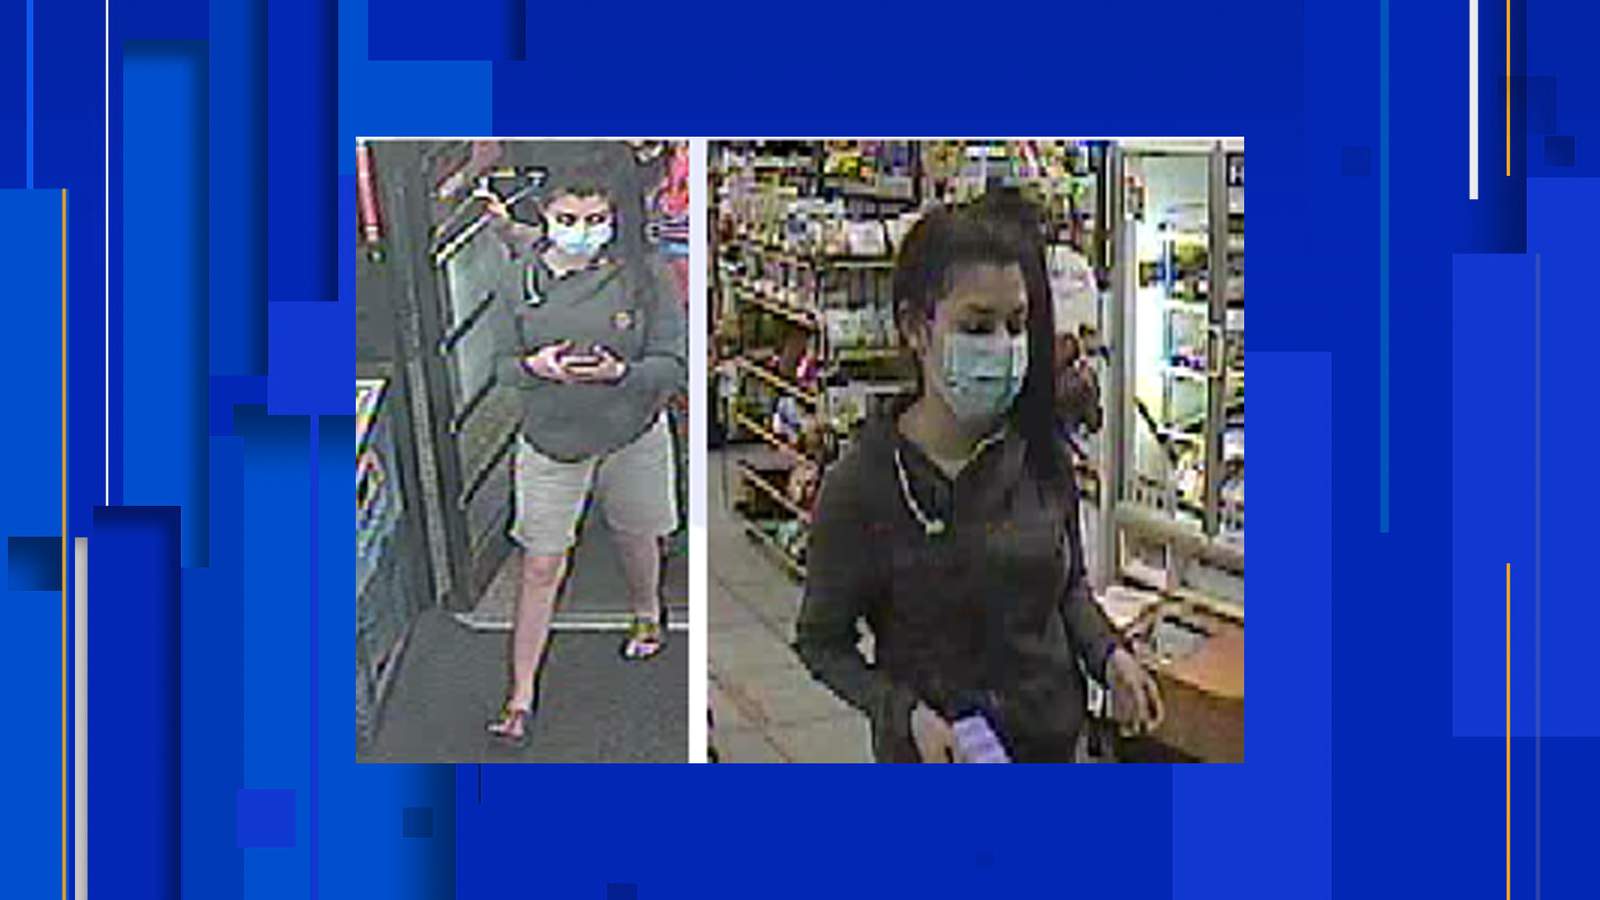 Have you seen this person? San Antonio police need your help finding this robbery suspect